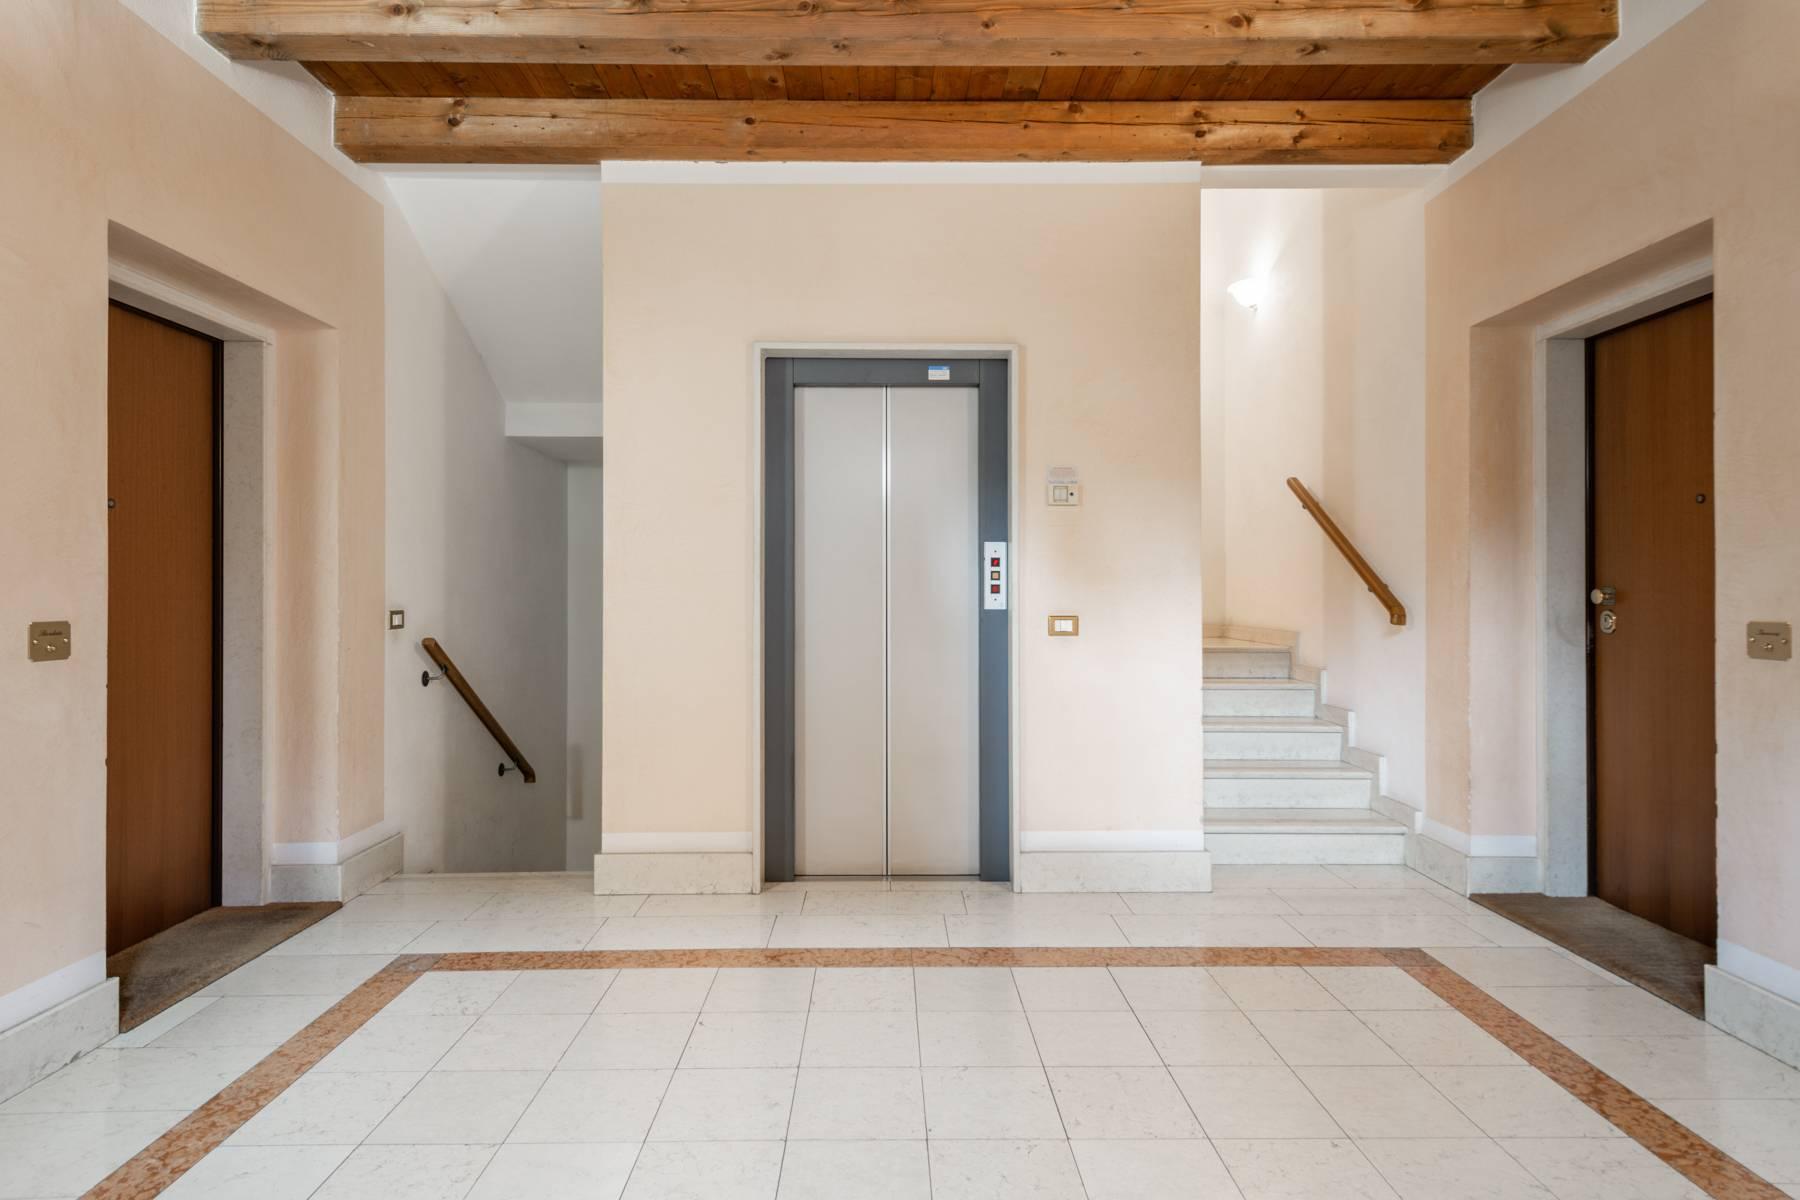 Stunning penthouse in Villa just few minutes from Verona's historic center - 12